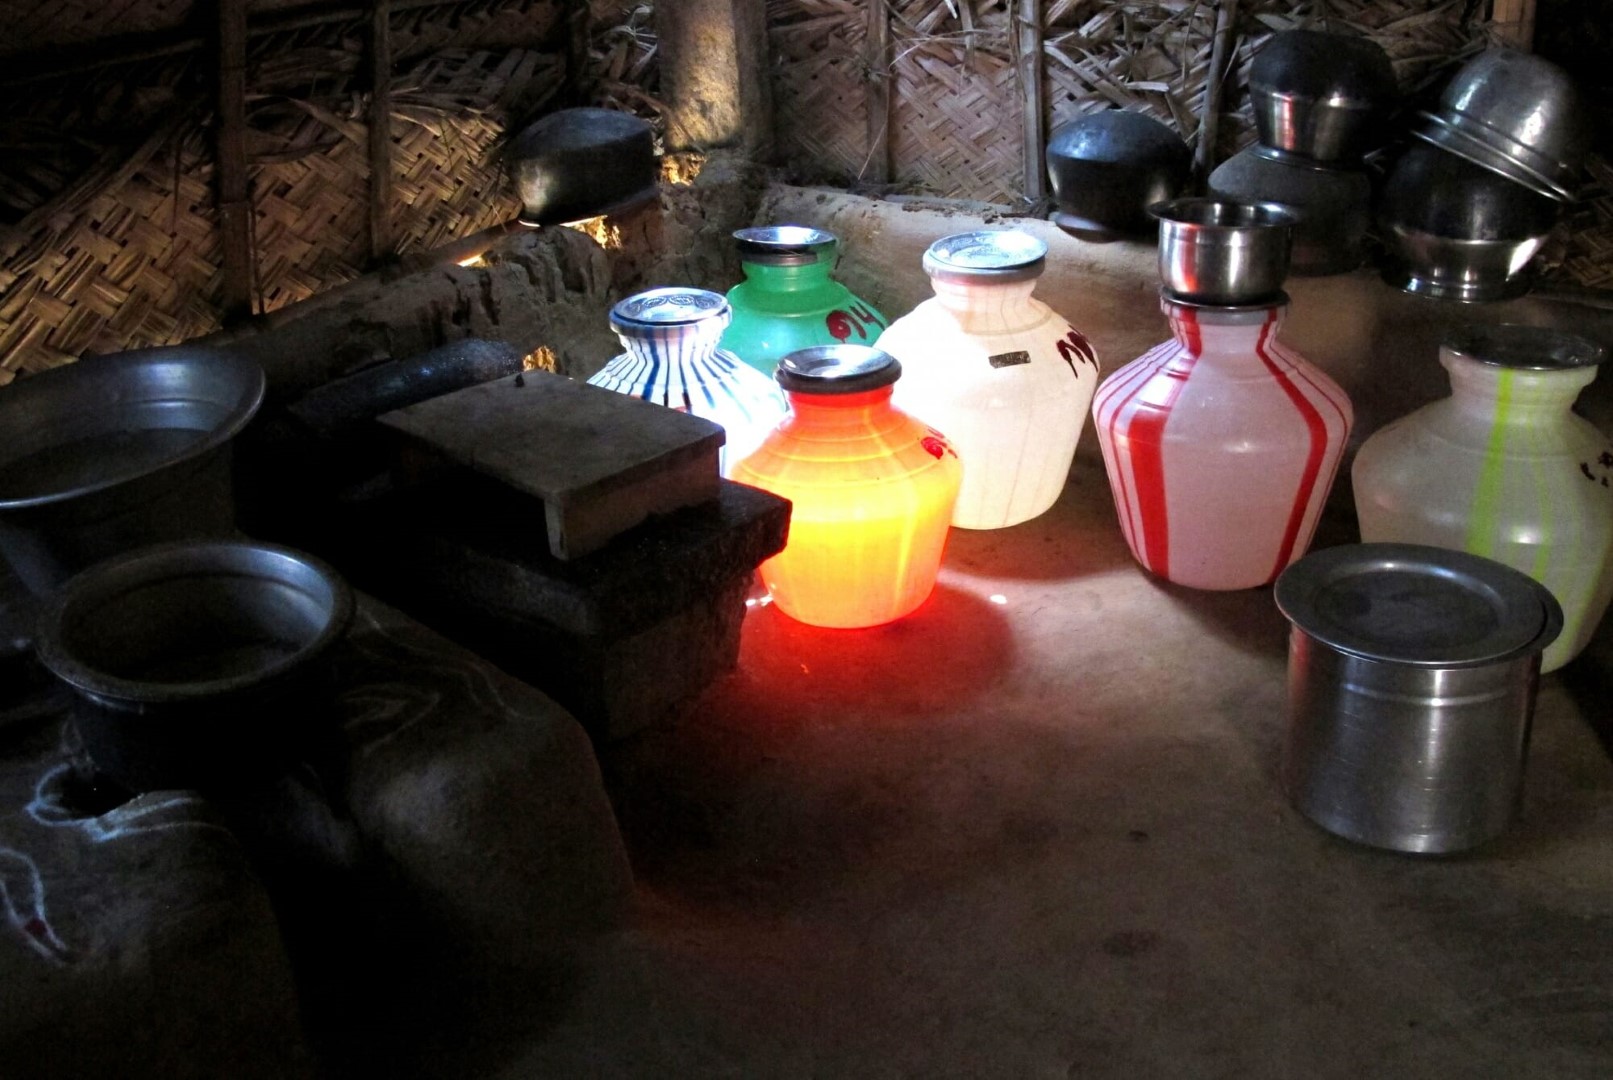 <span style="font-weight:normal;">Illuminated Water Urns, 2013</span>